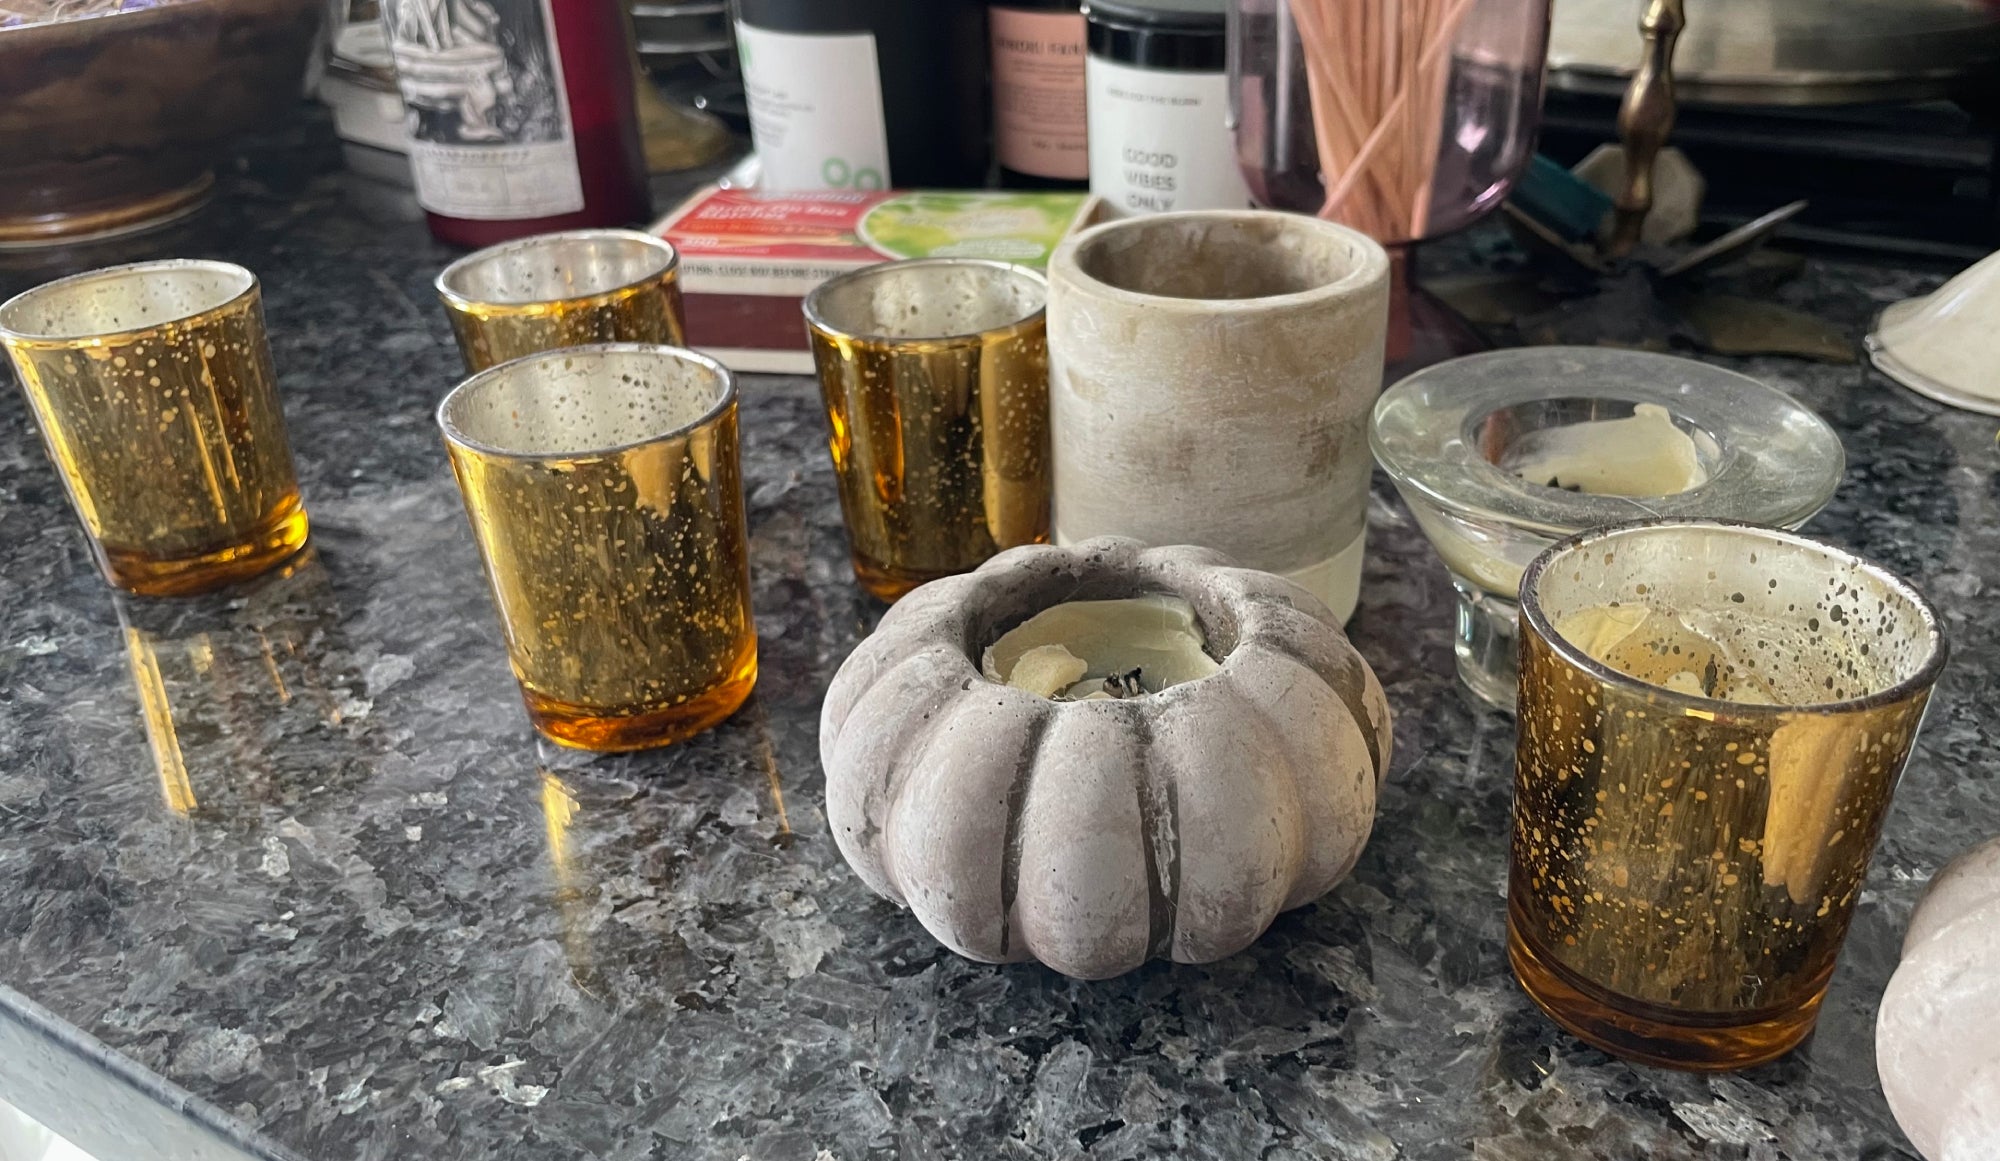 Several old candles in candle jars on a marble countertop, ready to be melted and made into new candles.